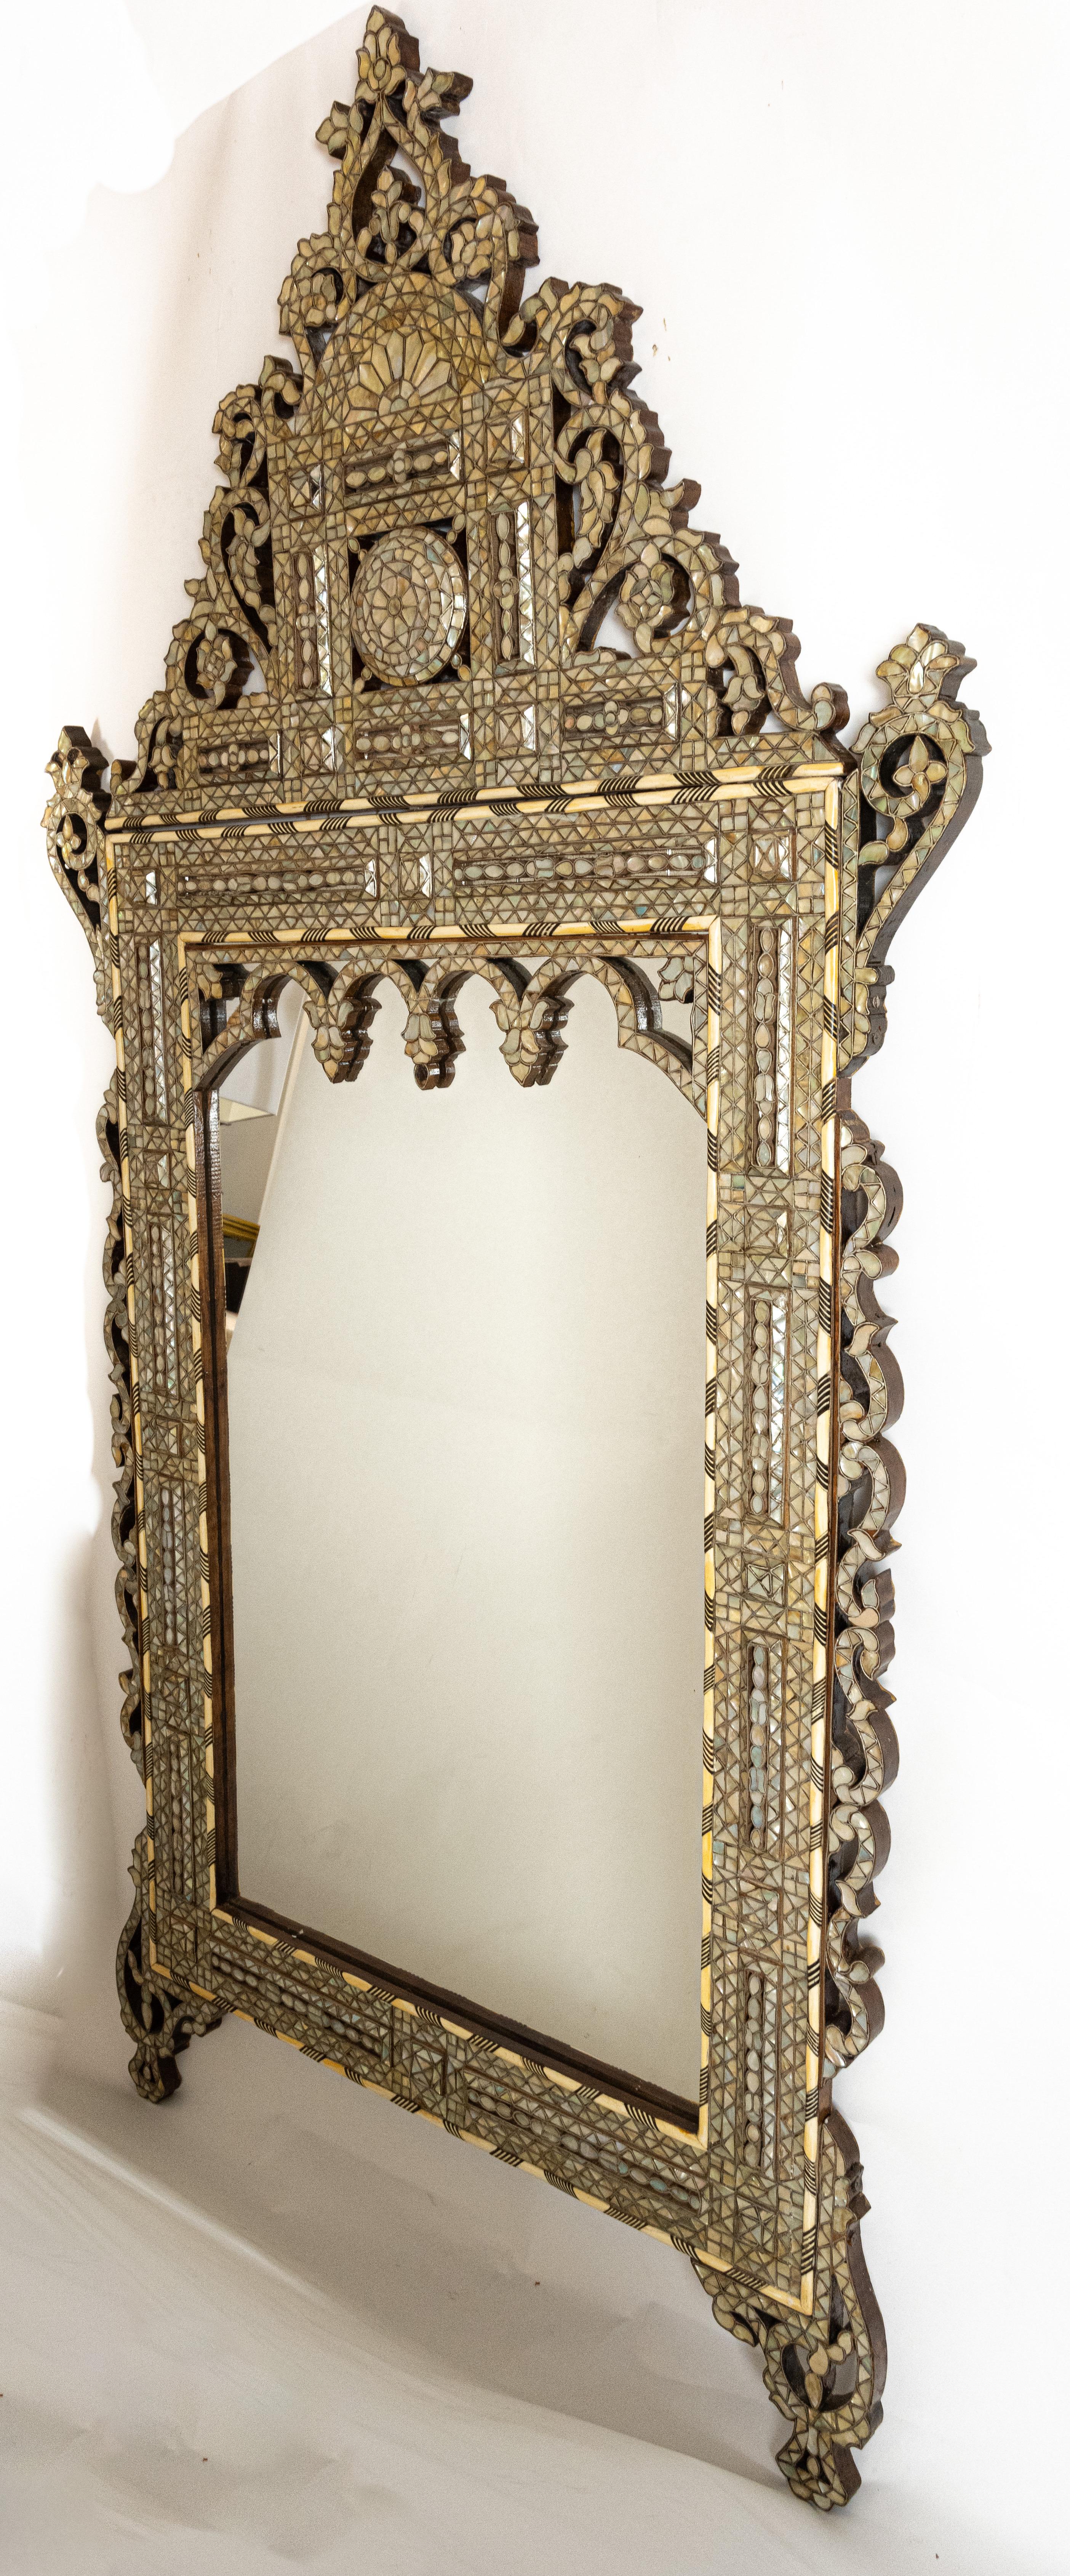 A large crested Syrian mother of pearl mirror with bracket feet. Having a rectangular vertical looking glass framed with finely detailed inlaid cedar-like wood. The glass surrounded by inner molding with contrasting composition details. The upper